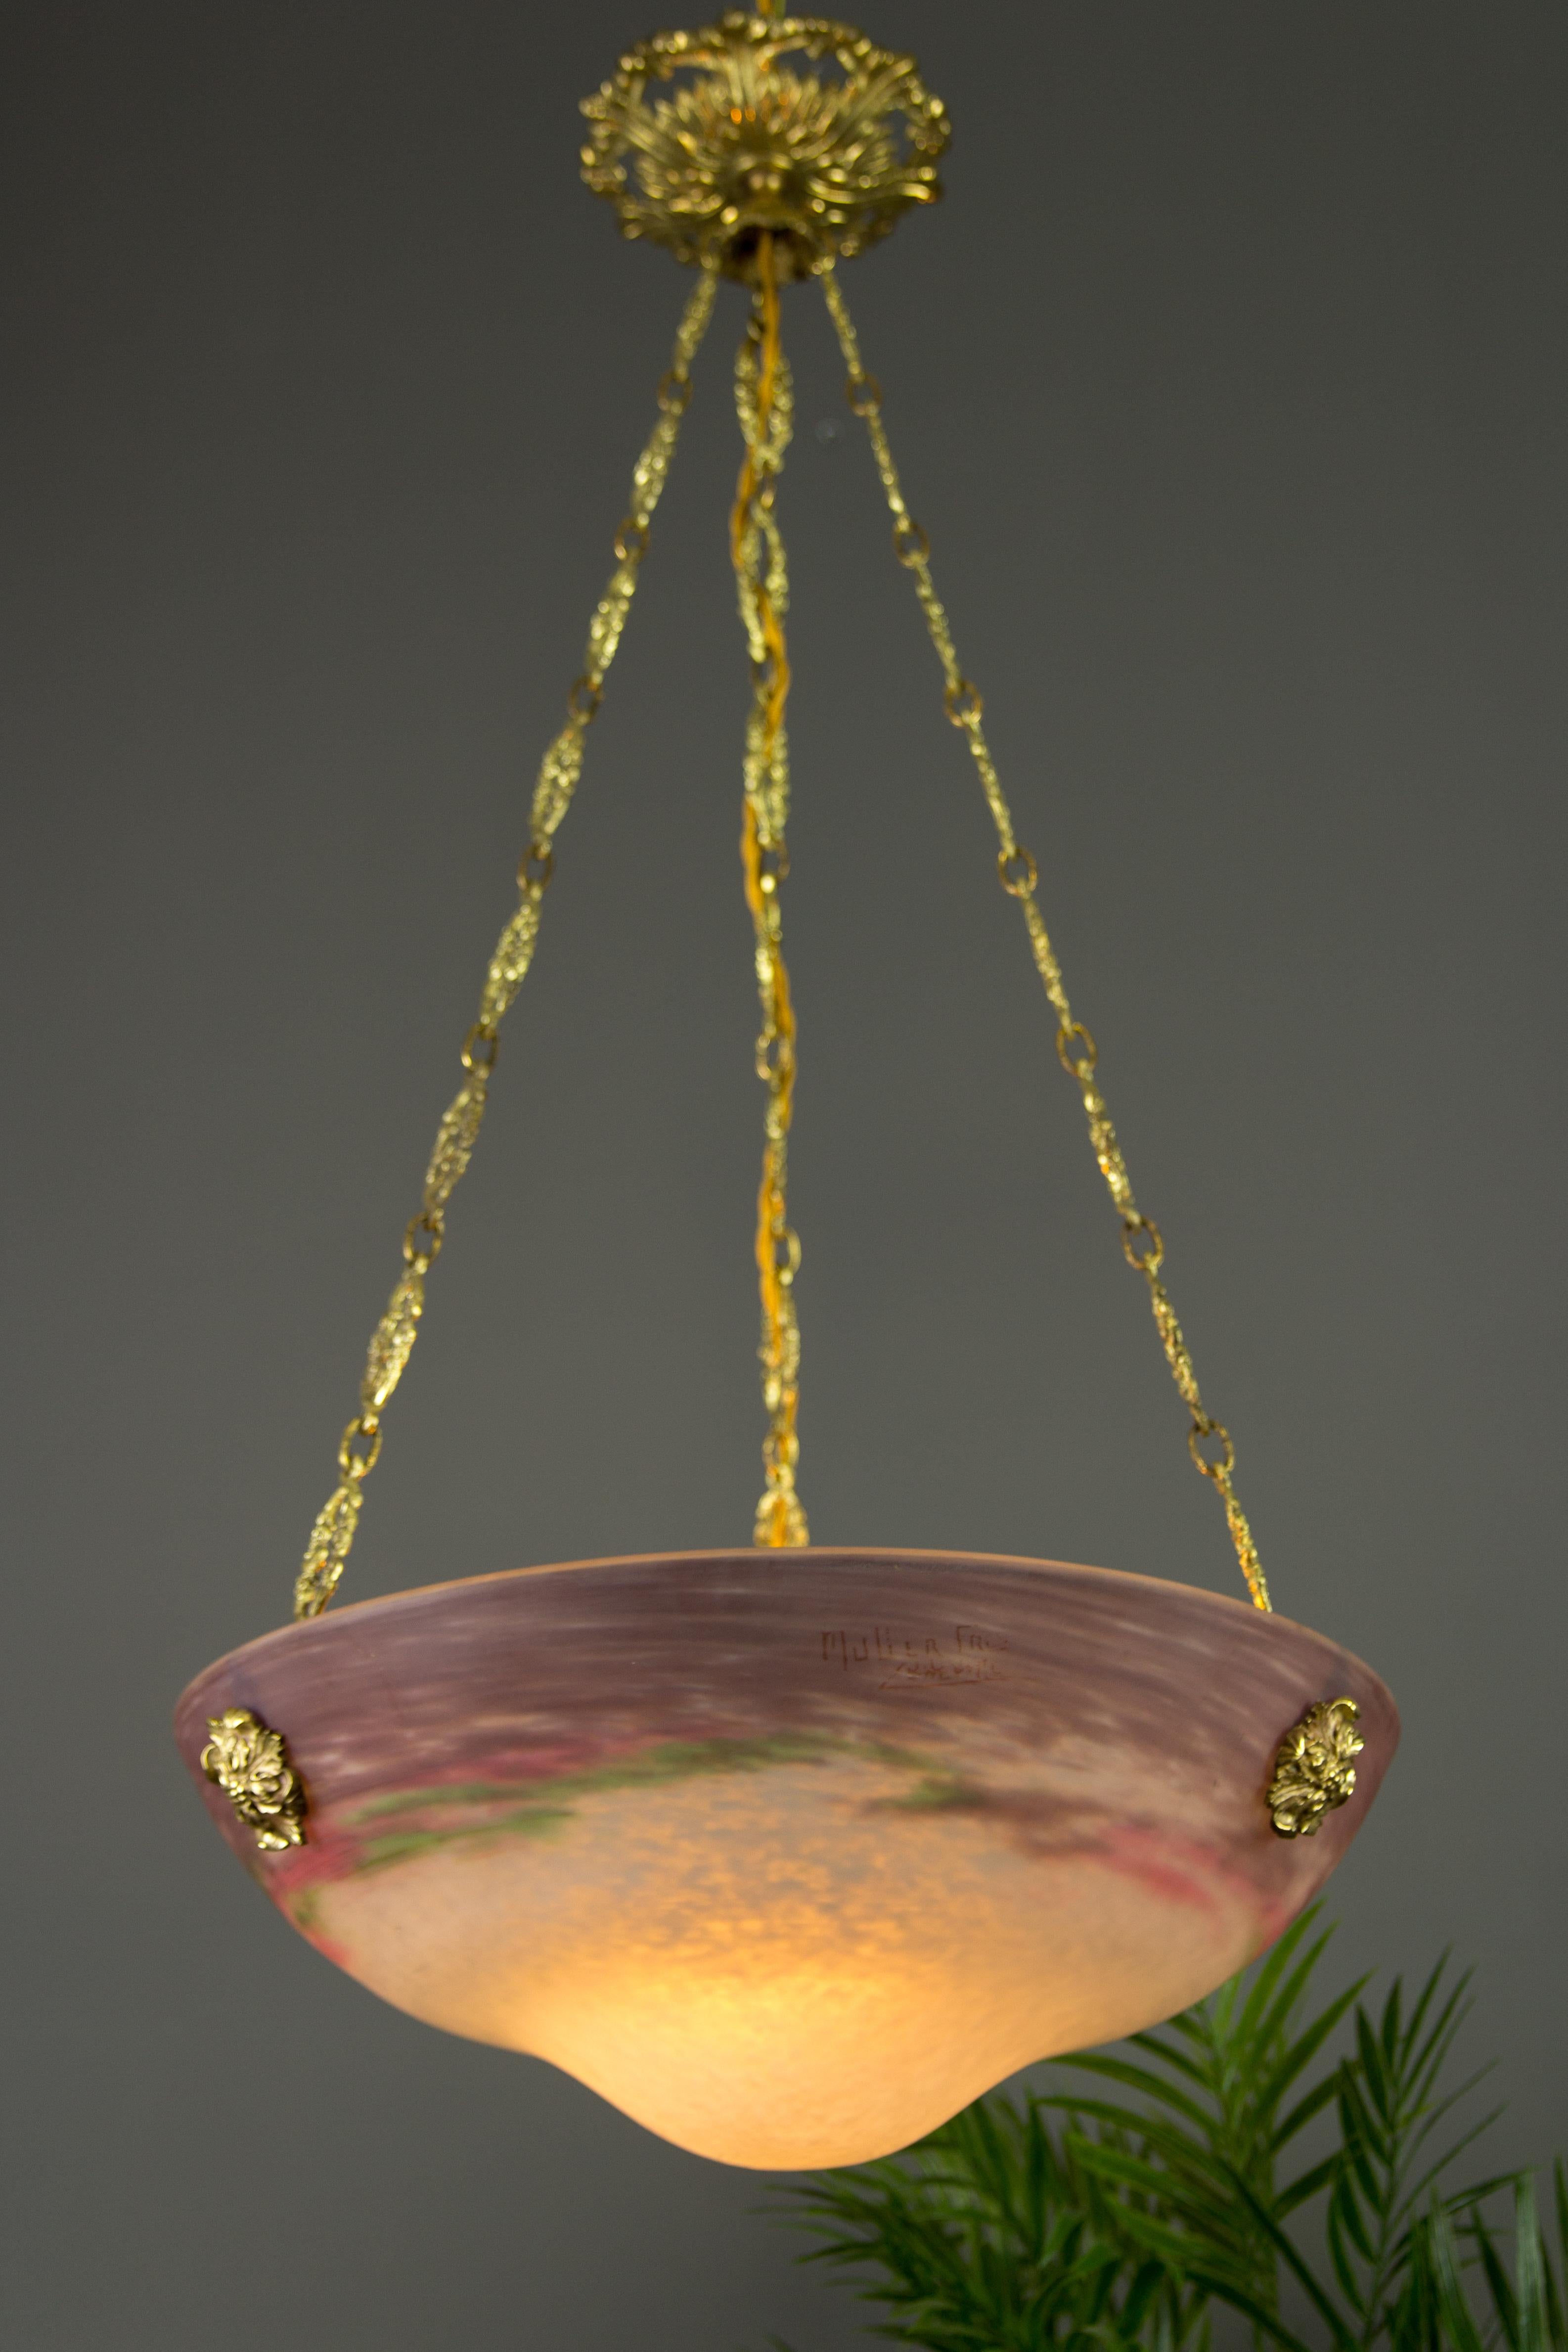 This adorable French Art Nouveau period pendant chandelier features a very unusual shaped mottled “Pâte de Verre” glass shade in white, purple, and green color, marked with Muller Frès Luneville, hung at an ornate bronze and brass fixture with one